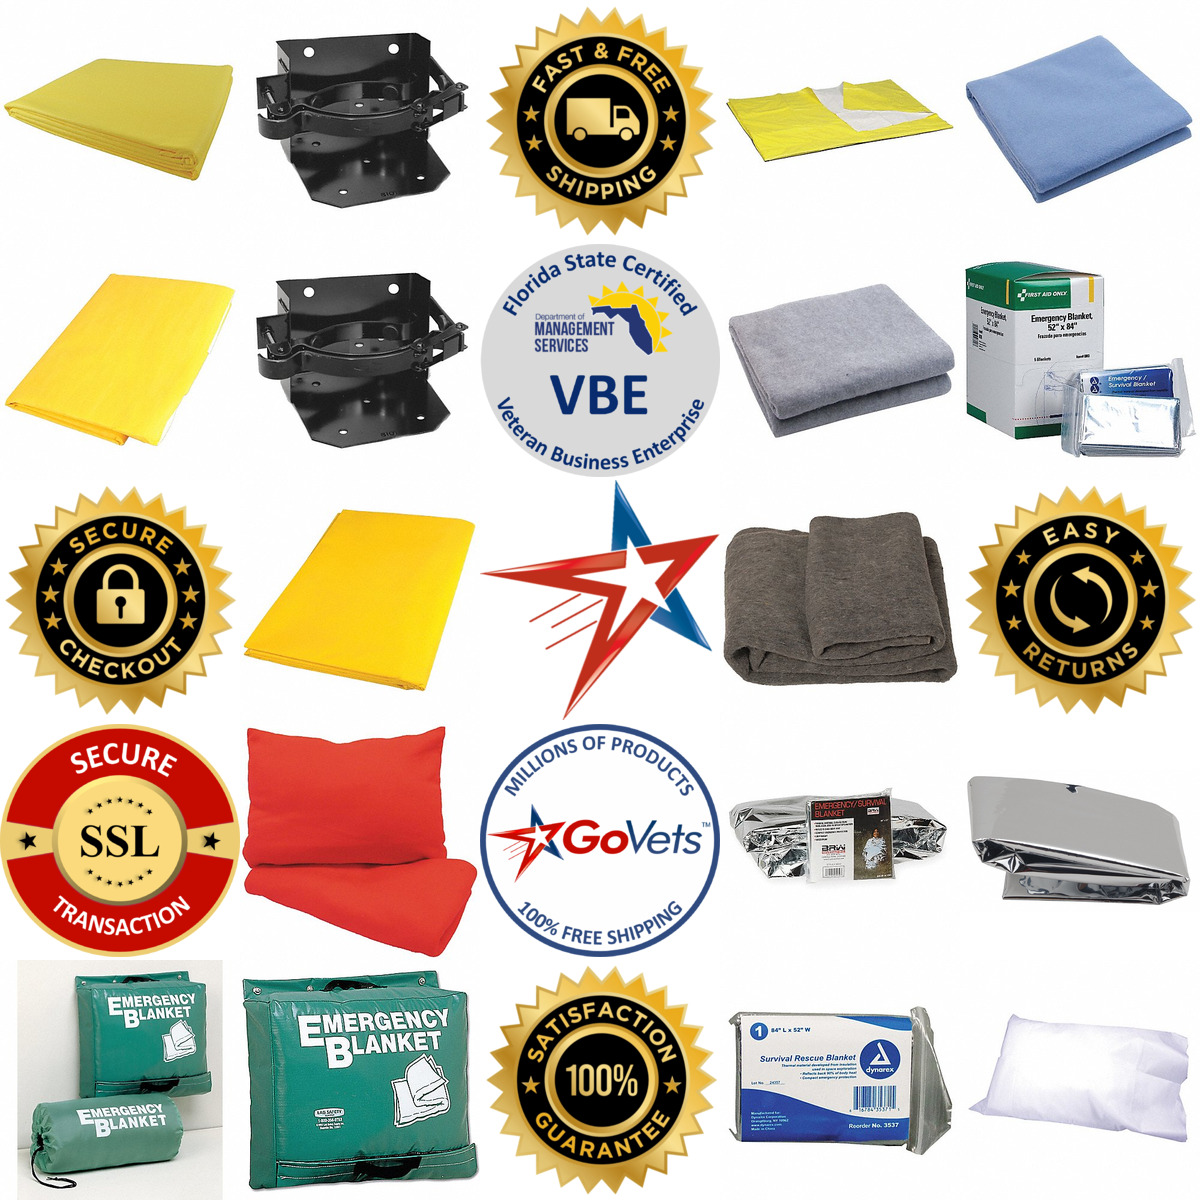 A selection of Emergency Blankets products on GoVets